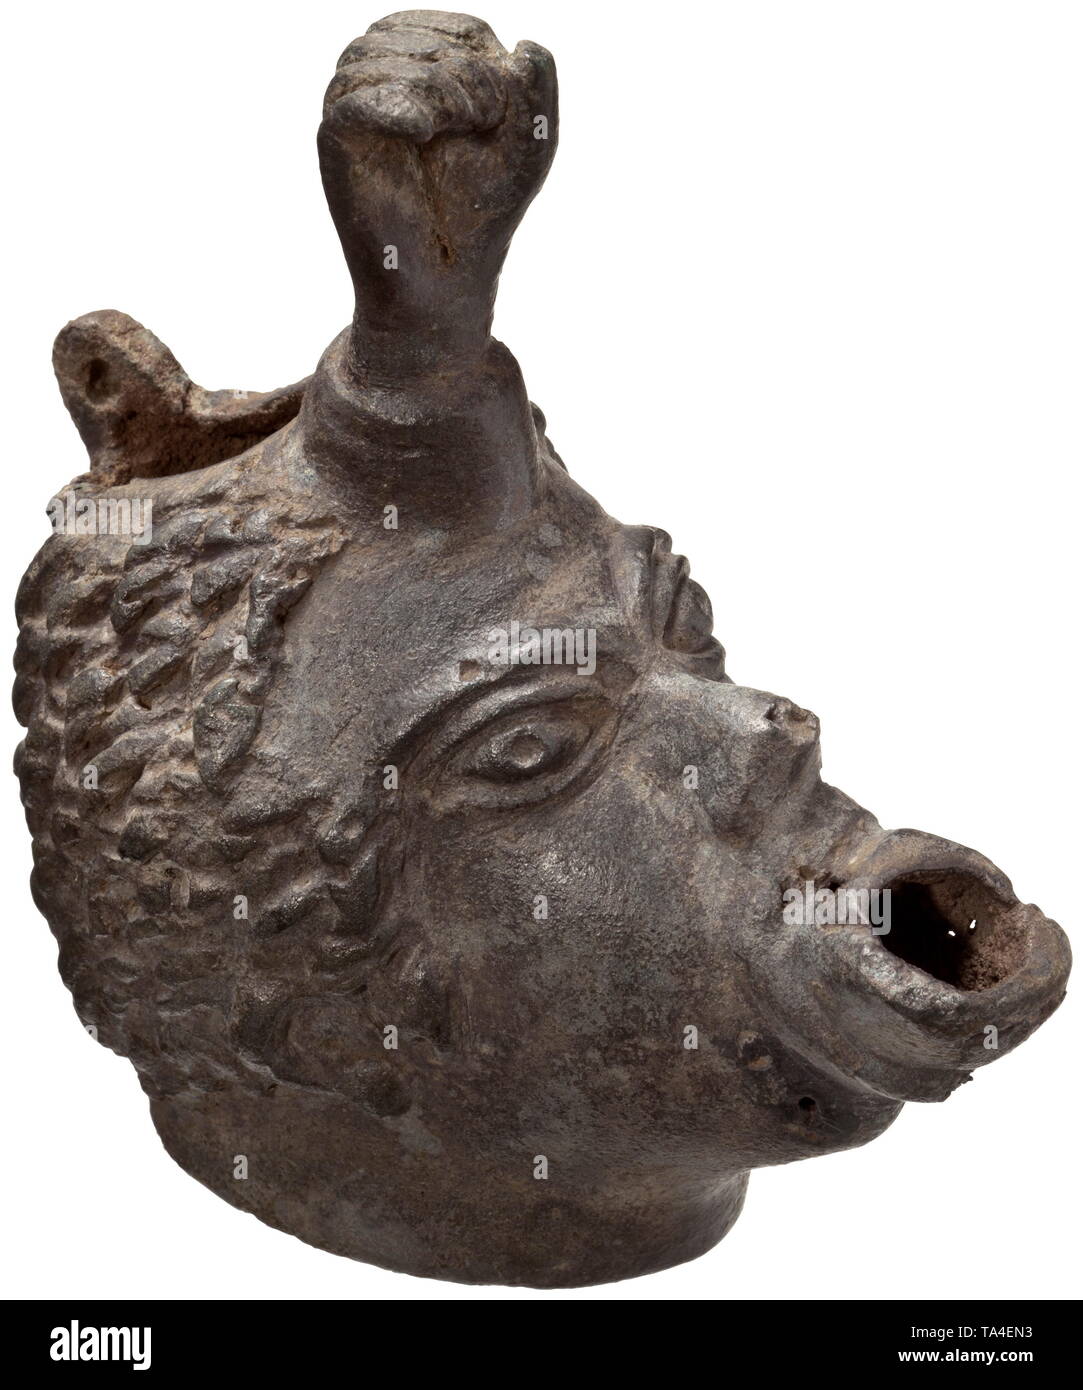 https://c8.alamy.com/comp/TA4EN3/a-roman-oil-lamp-shaped-like-an-african-head-2nd-3rd-century-bronze-lamp-the-opening-of-which-is-fashioned-as-the-pouting-mouth-of-an-african-man-in-combination-with-the-bulging-eyes-and-a-hollow-fist-emerging-from-the-forehead-the-whole-piece-has-a-grotesque-appearance-the-hair-styled-in-cropped-curly-locks-the-lid-is-missing-on-the-back-of-the-head-one-hinge-bracket-still-in-place-rare-version-of-a-common-type-with-a-fist-on-the-forehead-dark-green-patina-length-96-cm-height-103-cm-provenance-viennese-private-collection-acqui-additional-rights-clearance-info-not-available-TA4EN3.jpg